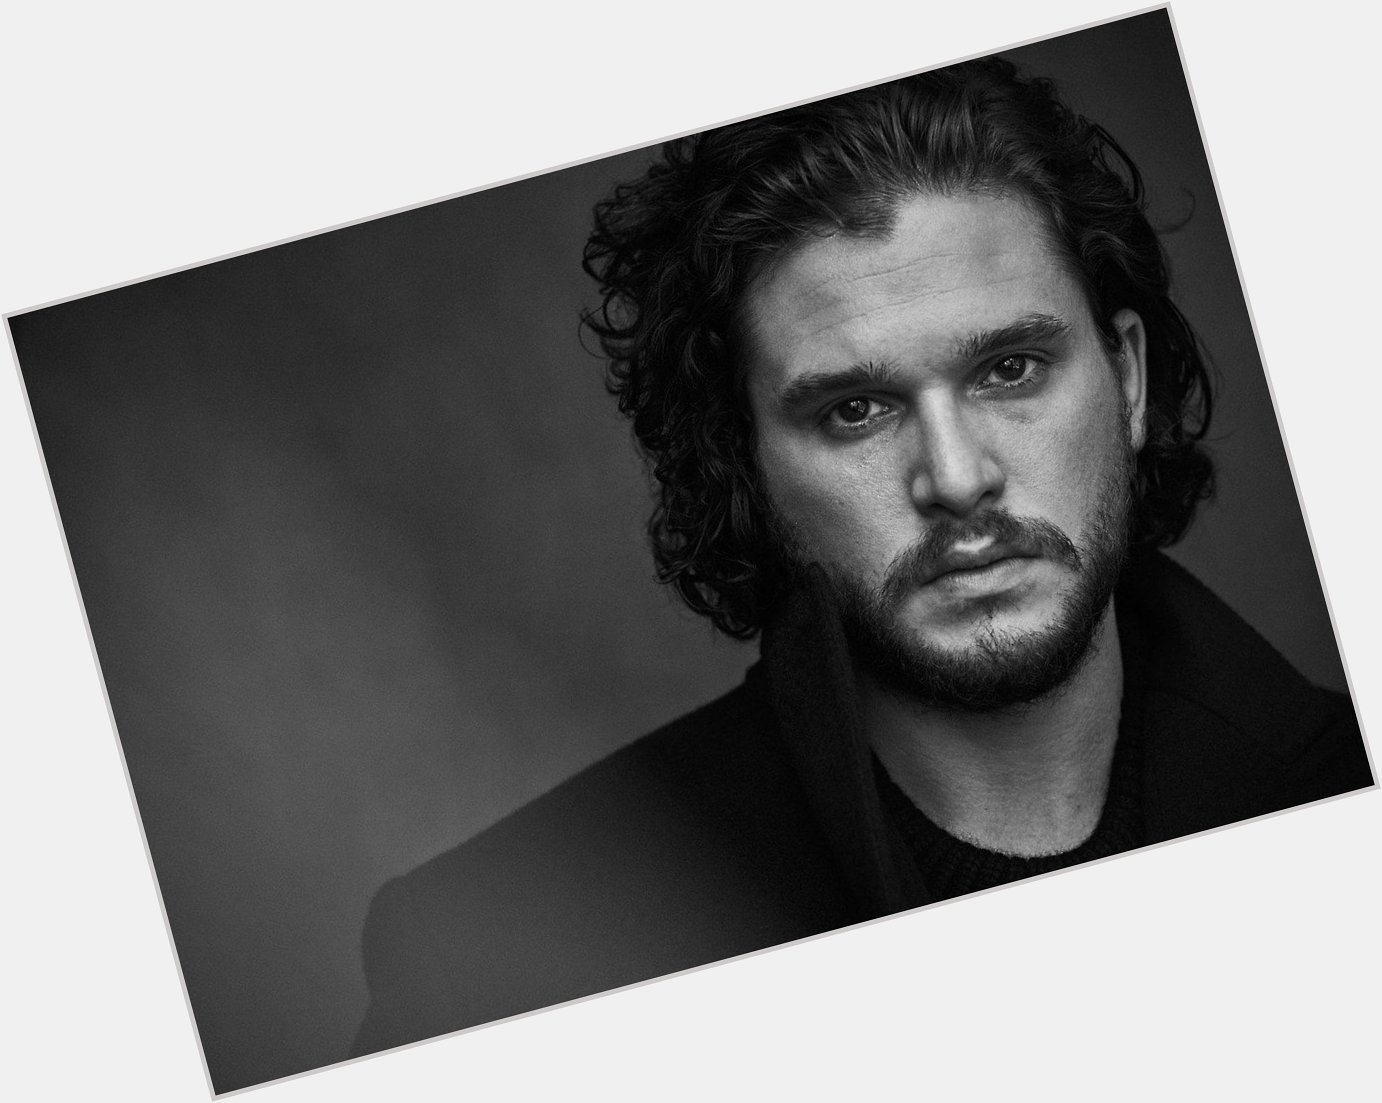 Happy birthday to the most powerful king of the seven kingdoms. Our promised prince. Congratulations Kit Harington 